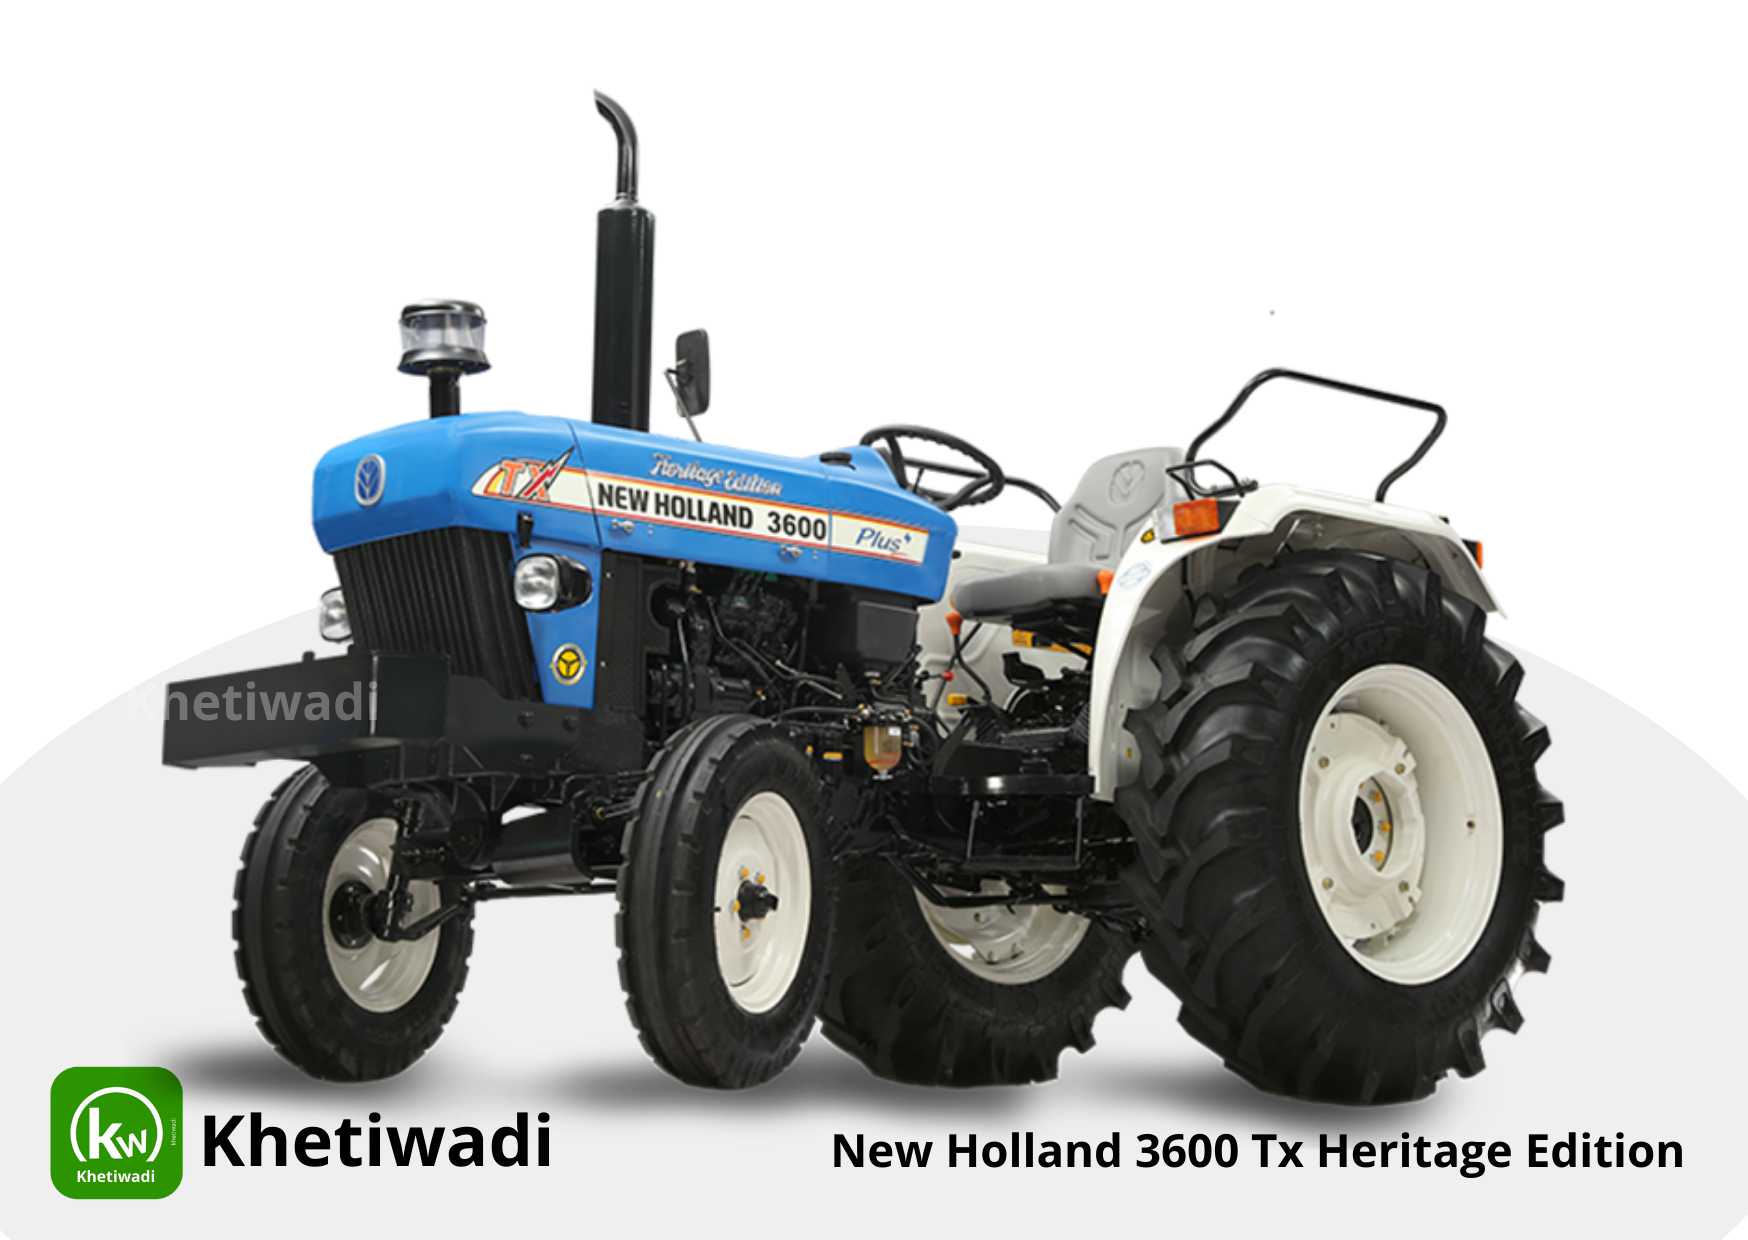 New Holland 3600 Tx Heritage Edition image